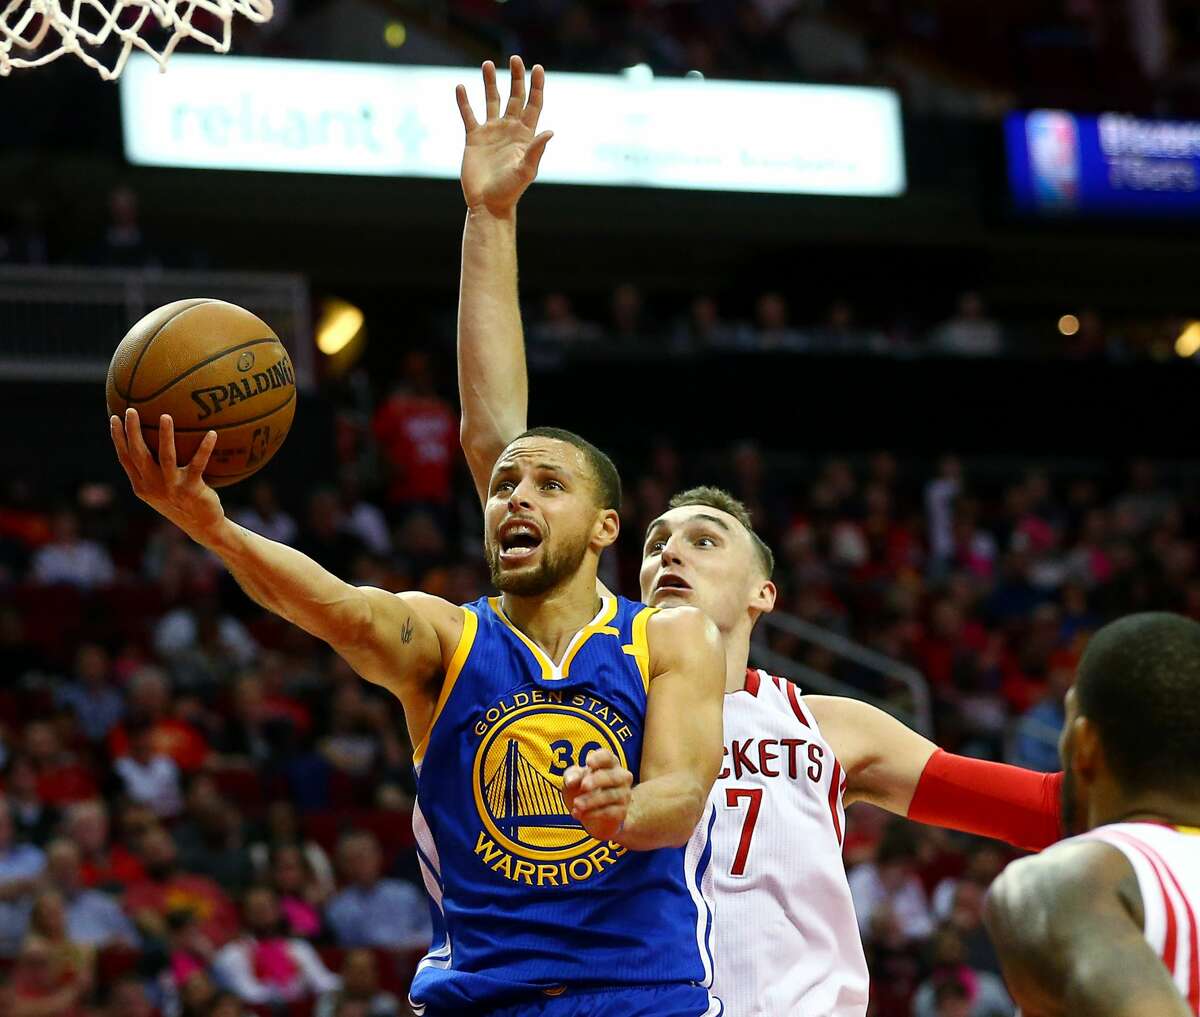 Golden State Warriors guard Stephen Curry (30) goes past Houston Rockets forward Sam Dekker (7) for a layup during the third quarter of an NBA game at the Toyota Center Friday, Jan. 20, 2017, in Houston. ( Jon Shapley / Houston Chronicle )